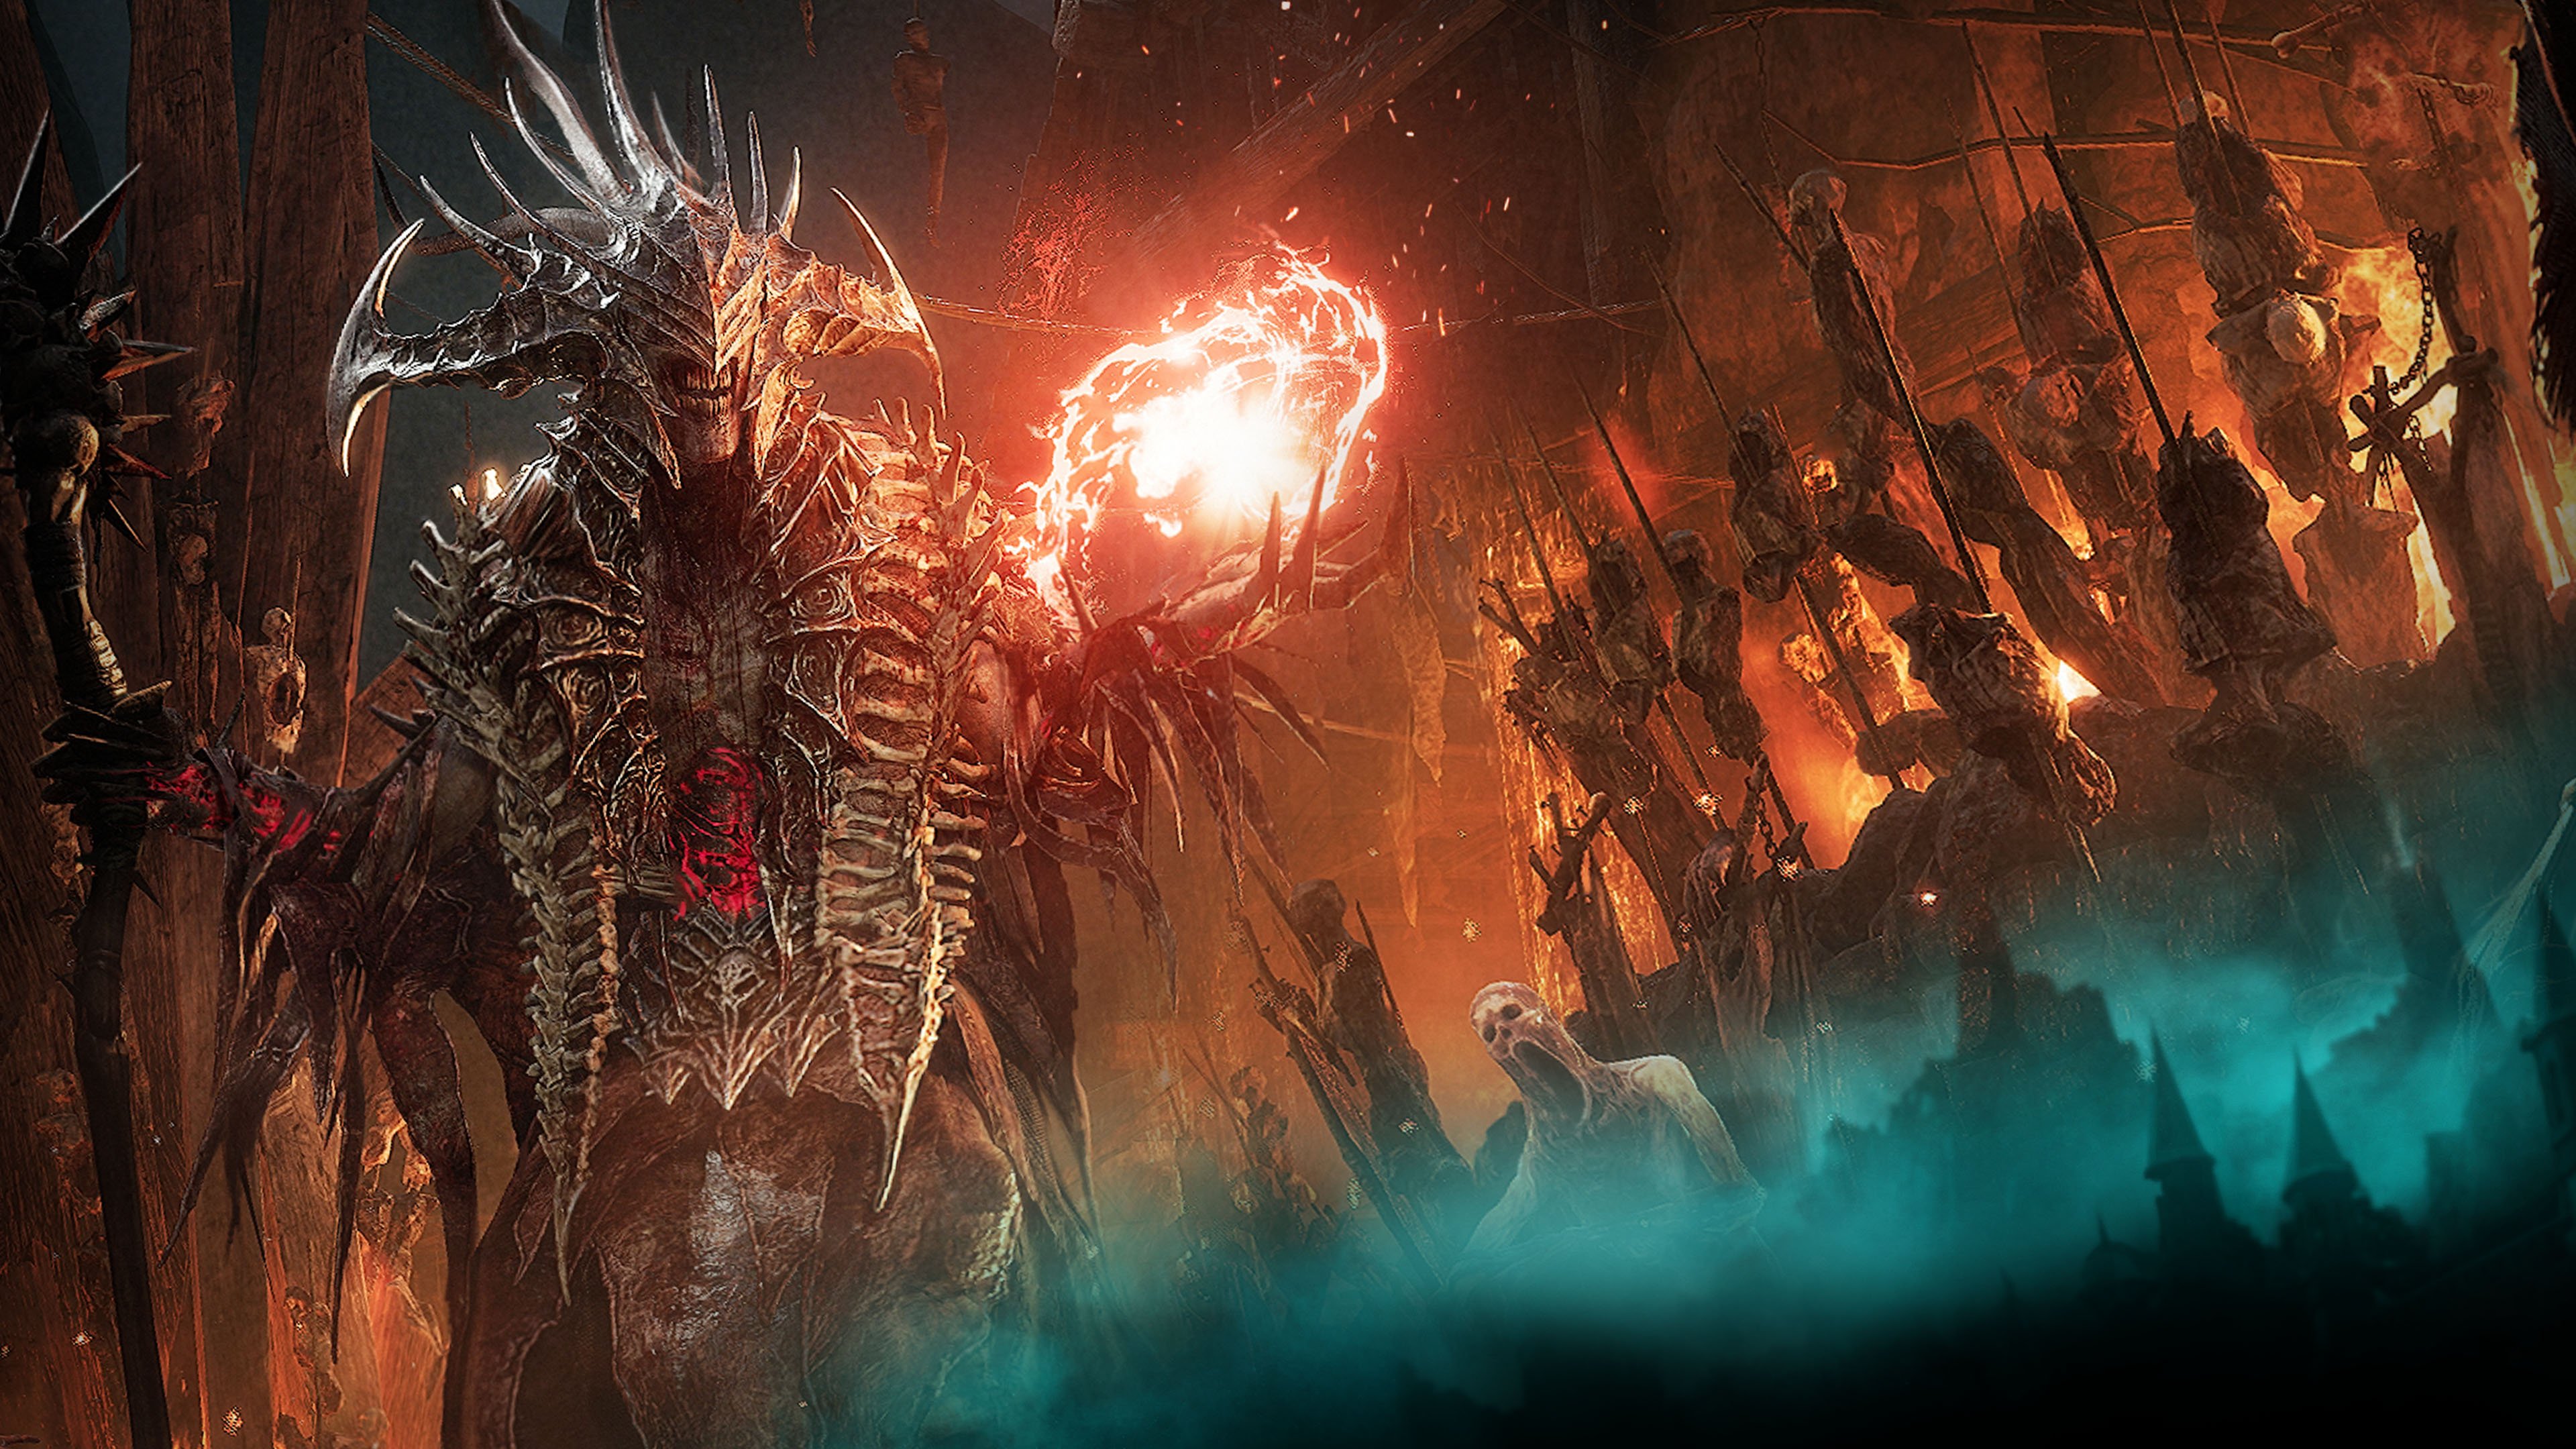 Guide to the Umbral Realm in Lords of the Fallen (LotF)